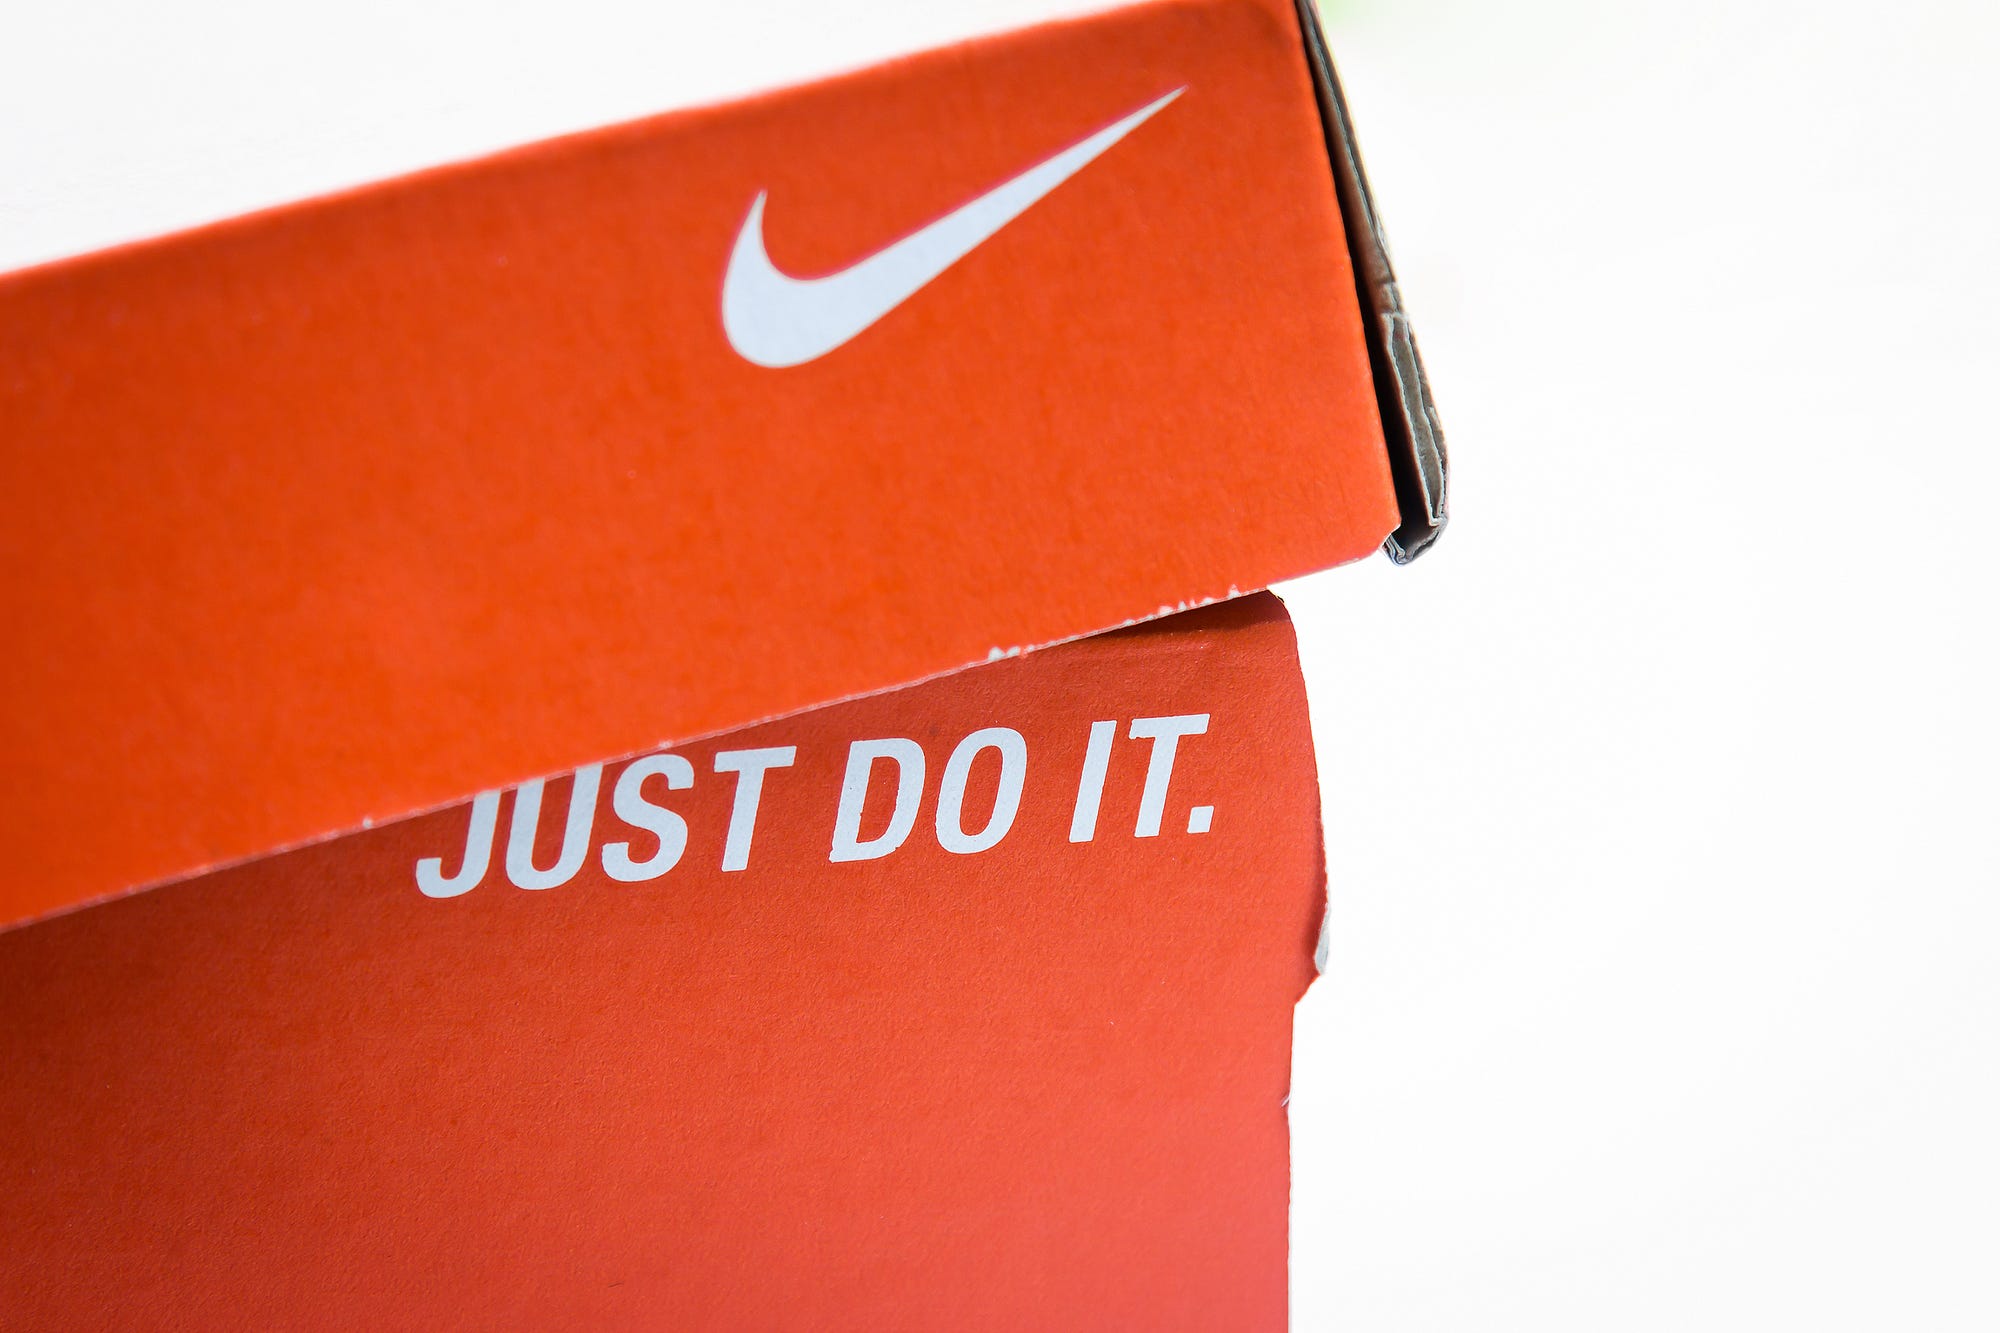 Nike's 'Just do it' slogan inspired by death row prisoner's last words